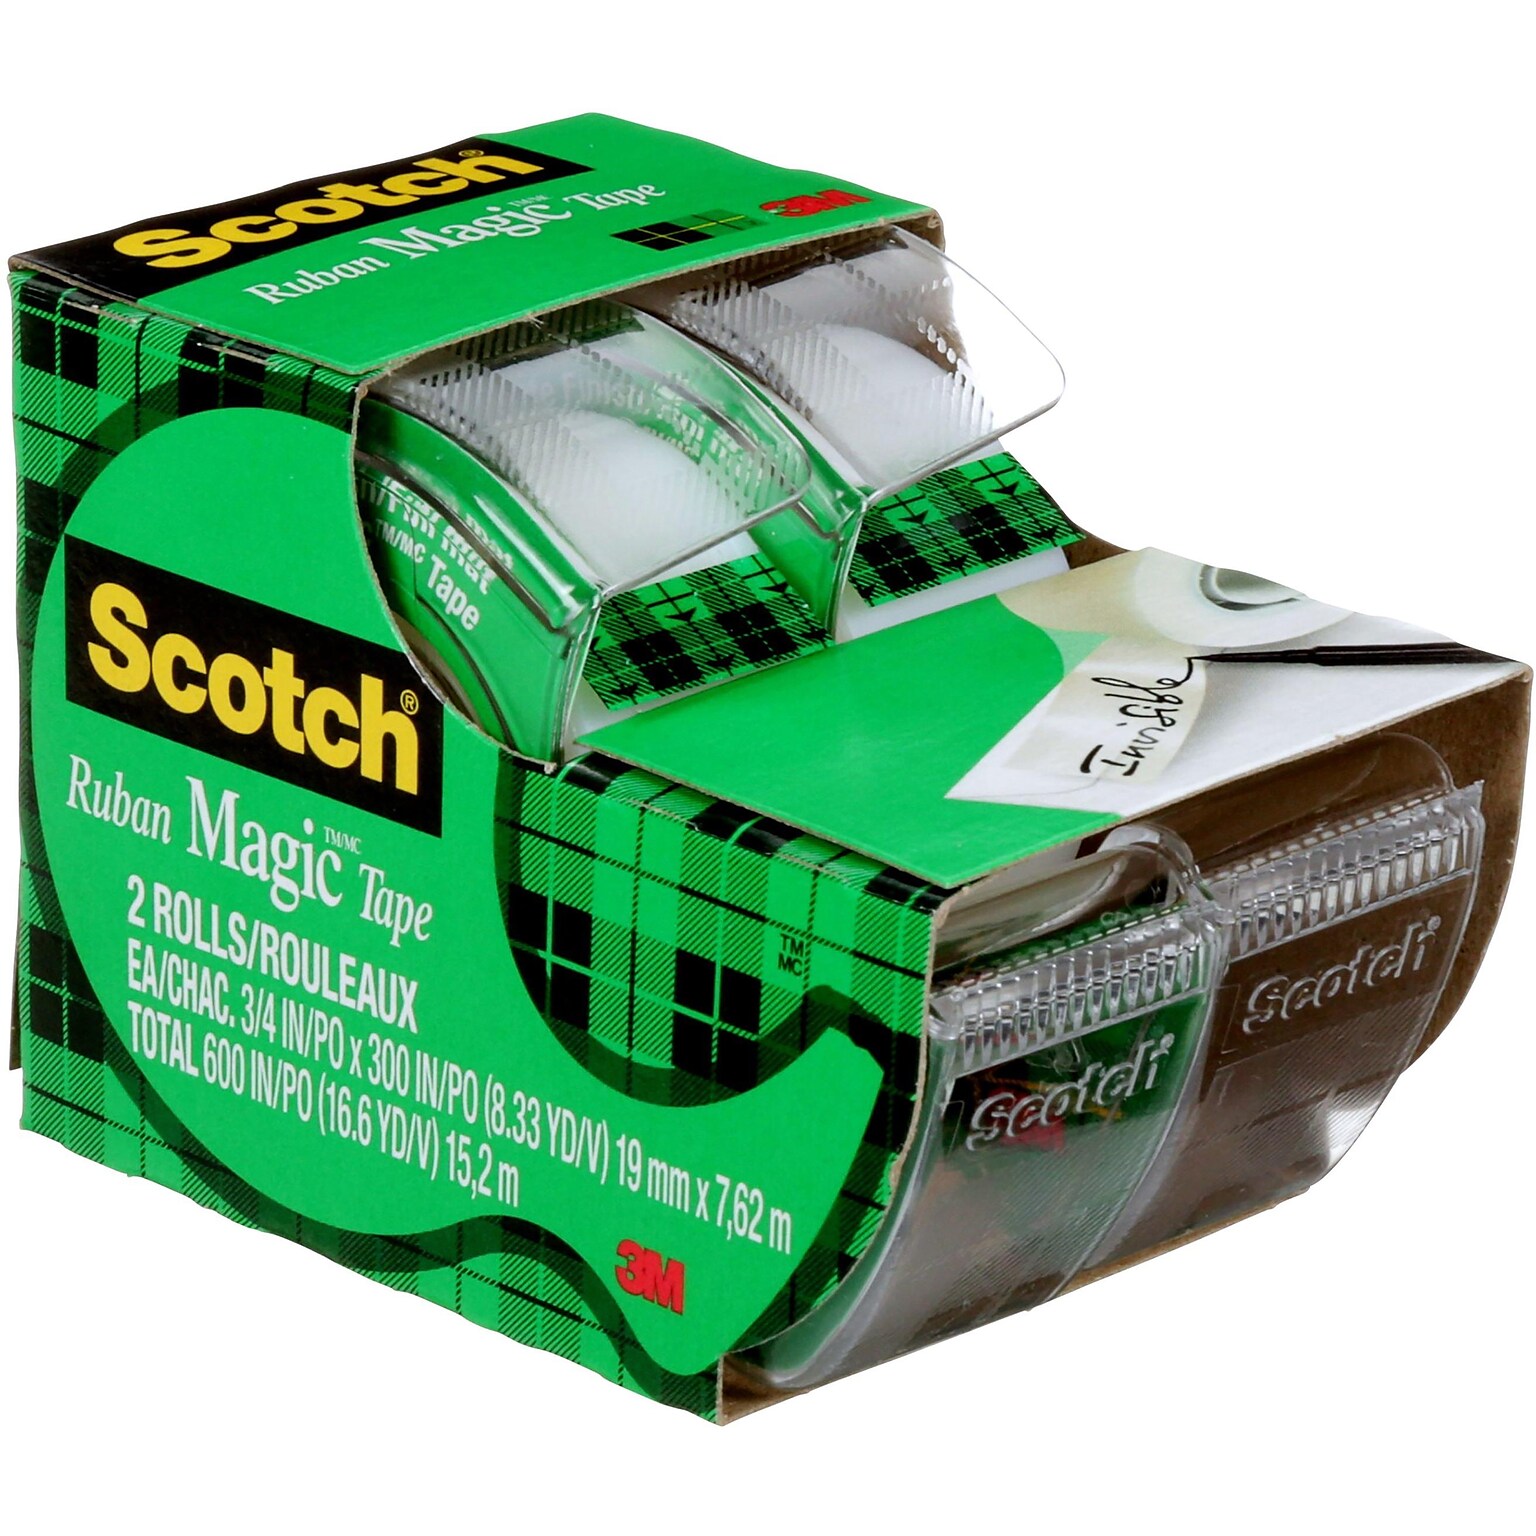 Scotch Magic Invisible Clear Tape Refill, 0.75 x 8.3 yds., 1Core, 2 Rolls/Pack (2105)